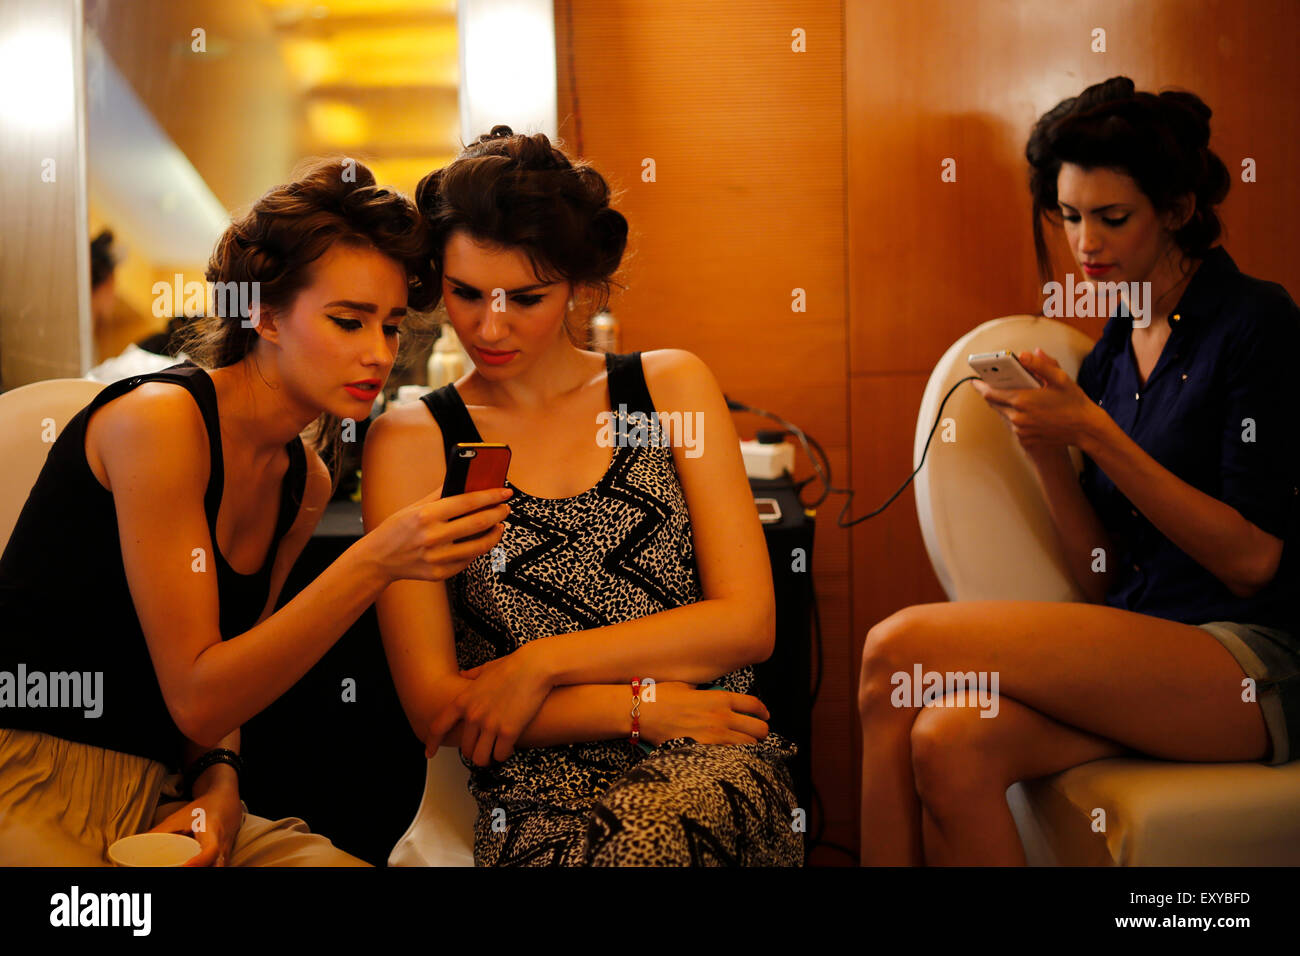 Models check their phones in the makeup room backstage before fashion show Stock Photo